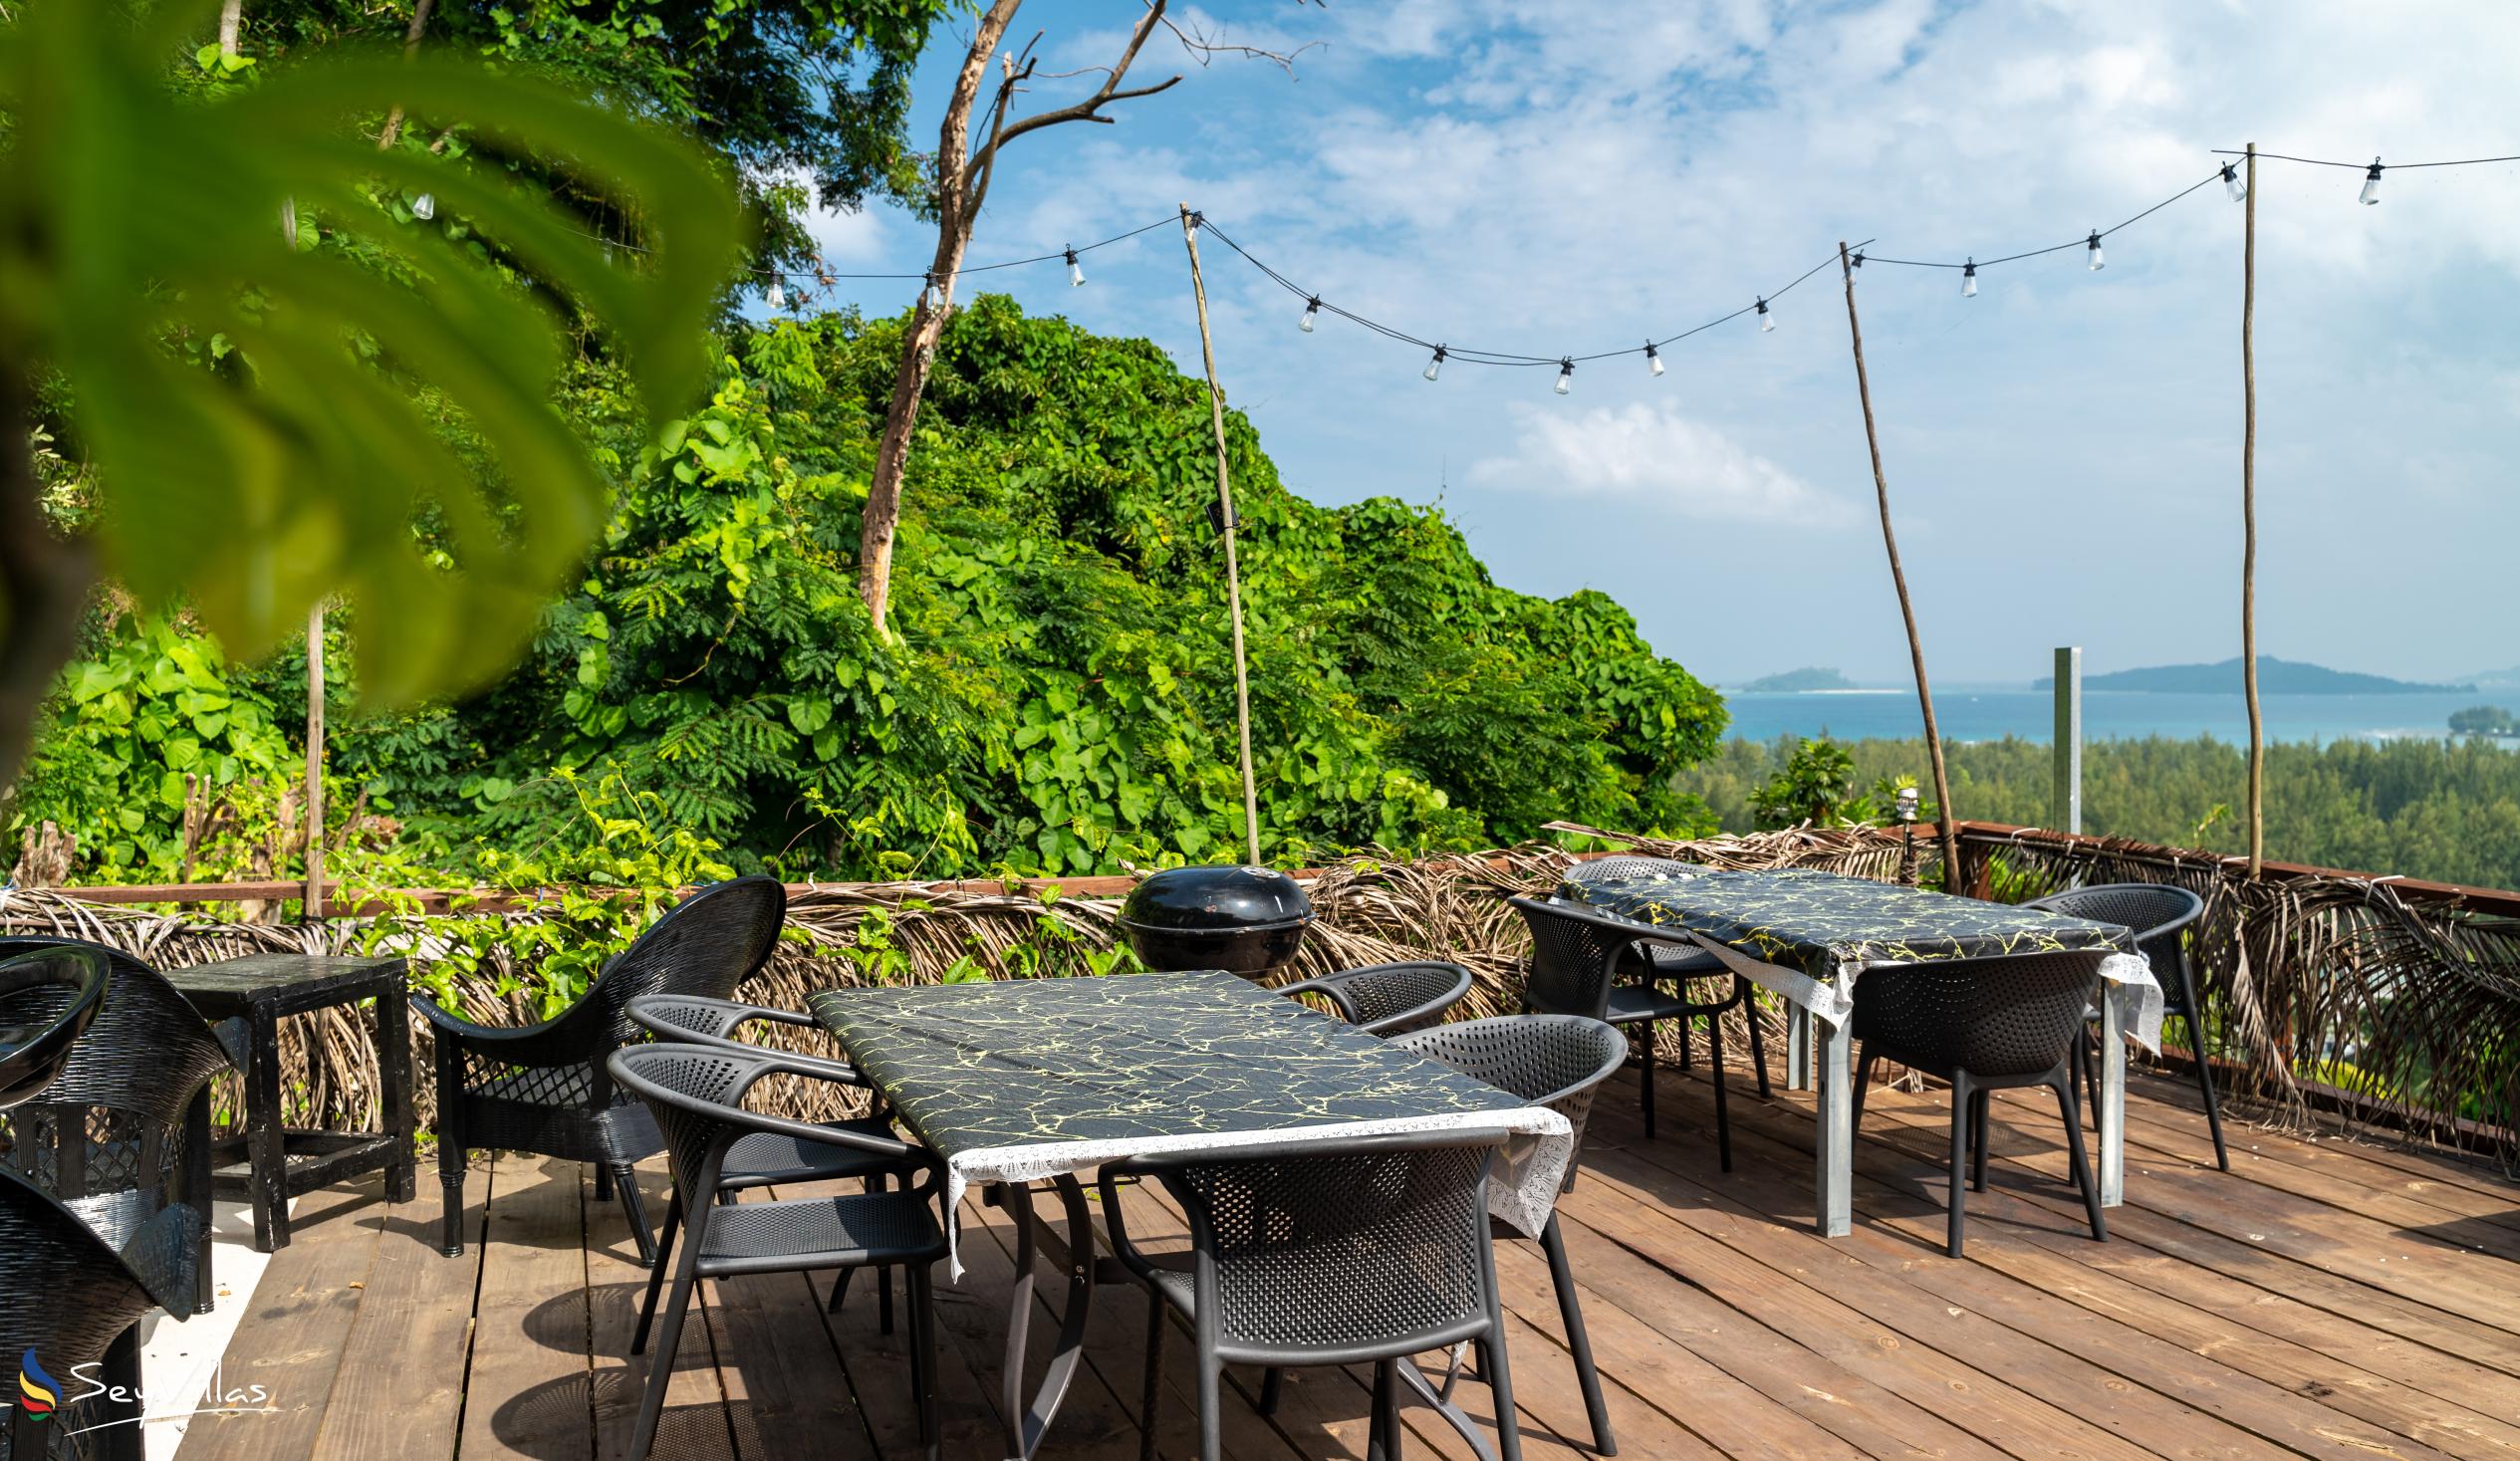 Photo 9: Auguste Holiday Residence - Outdoor area - Mahé (Seychelles)